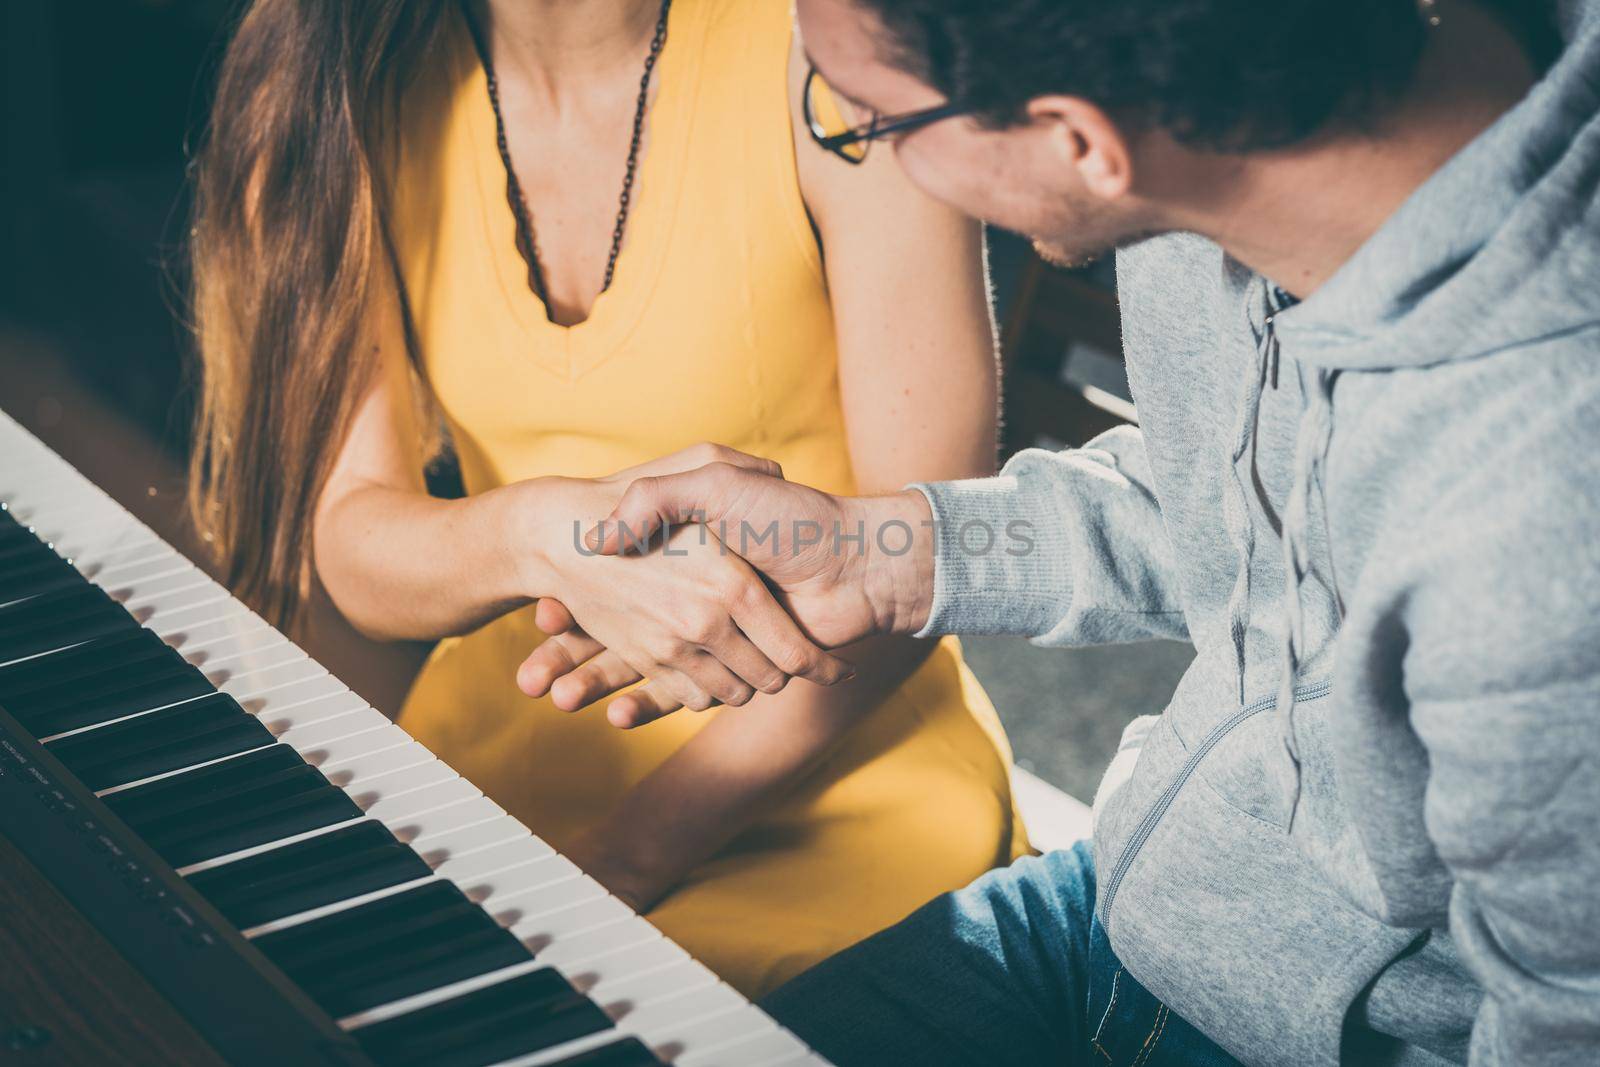 Piano teacher and student shaking hands after music lesson